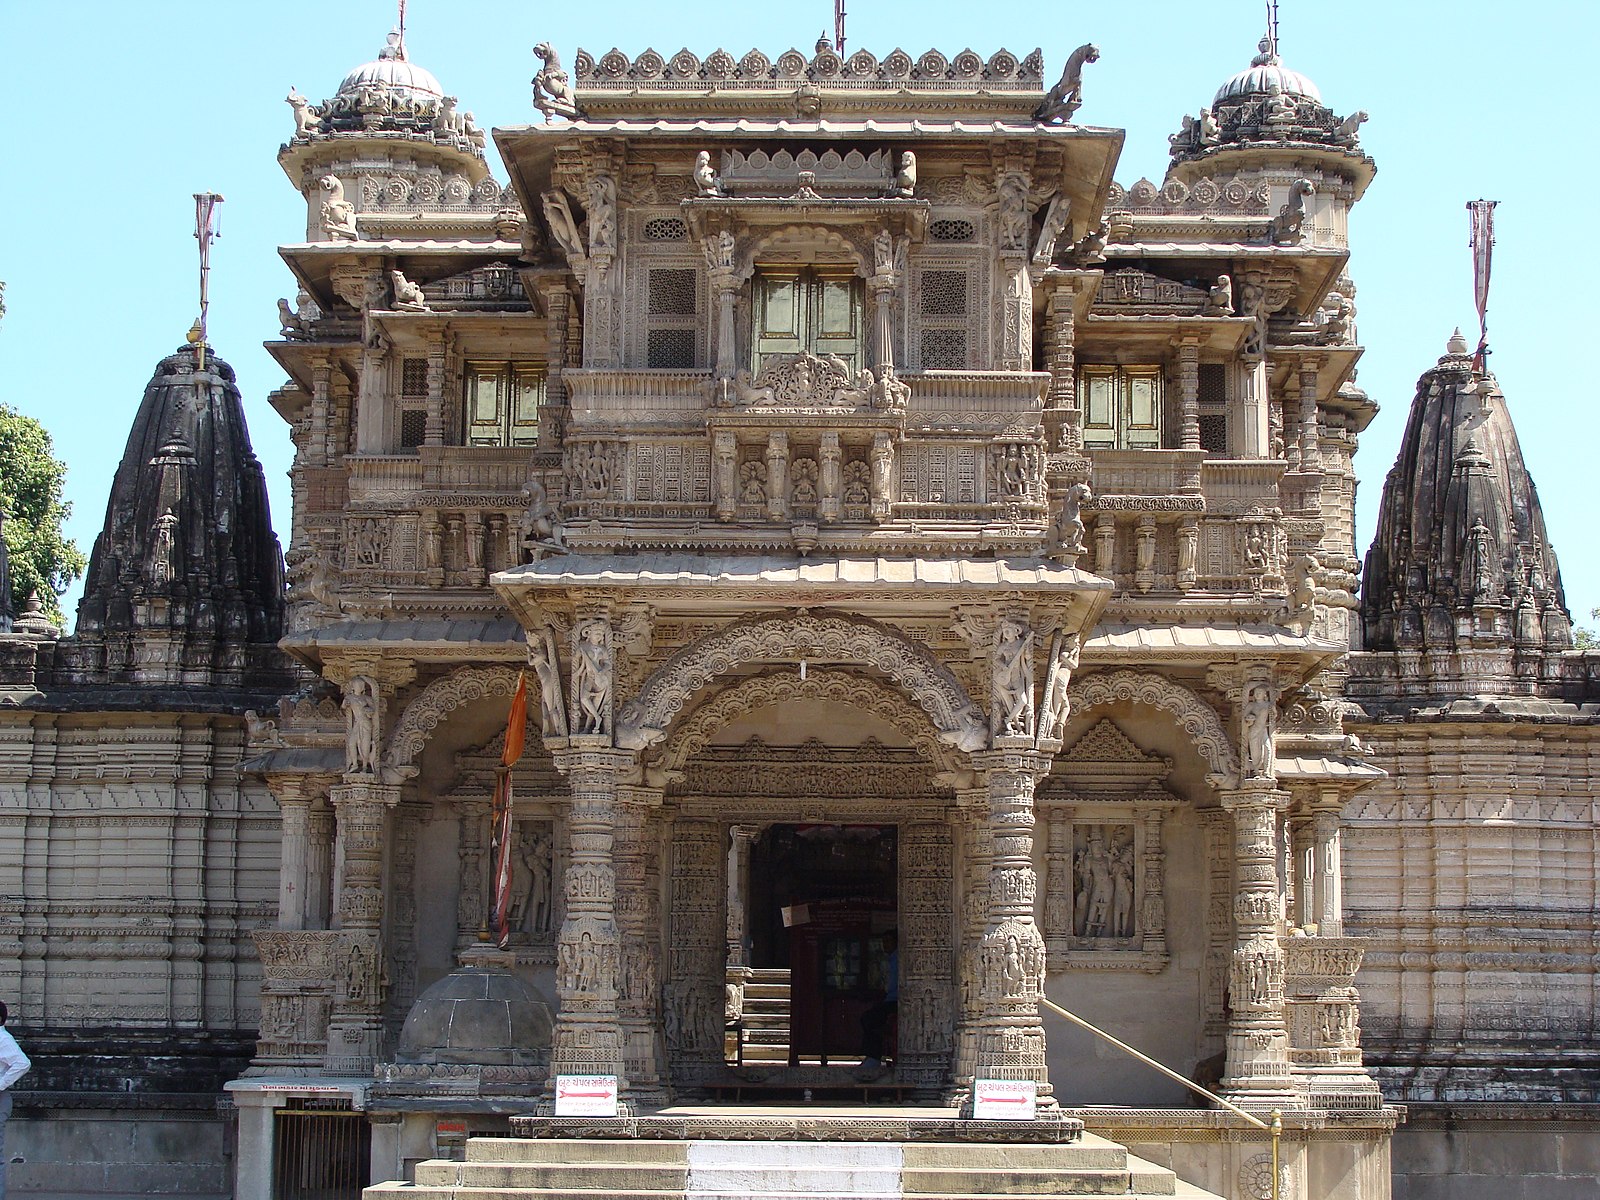 Hutheesing Jain Temple Front face of the gateway porch